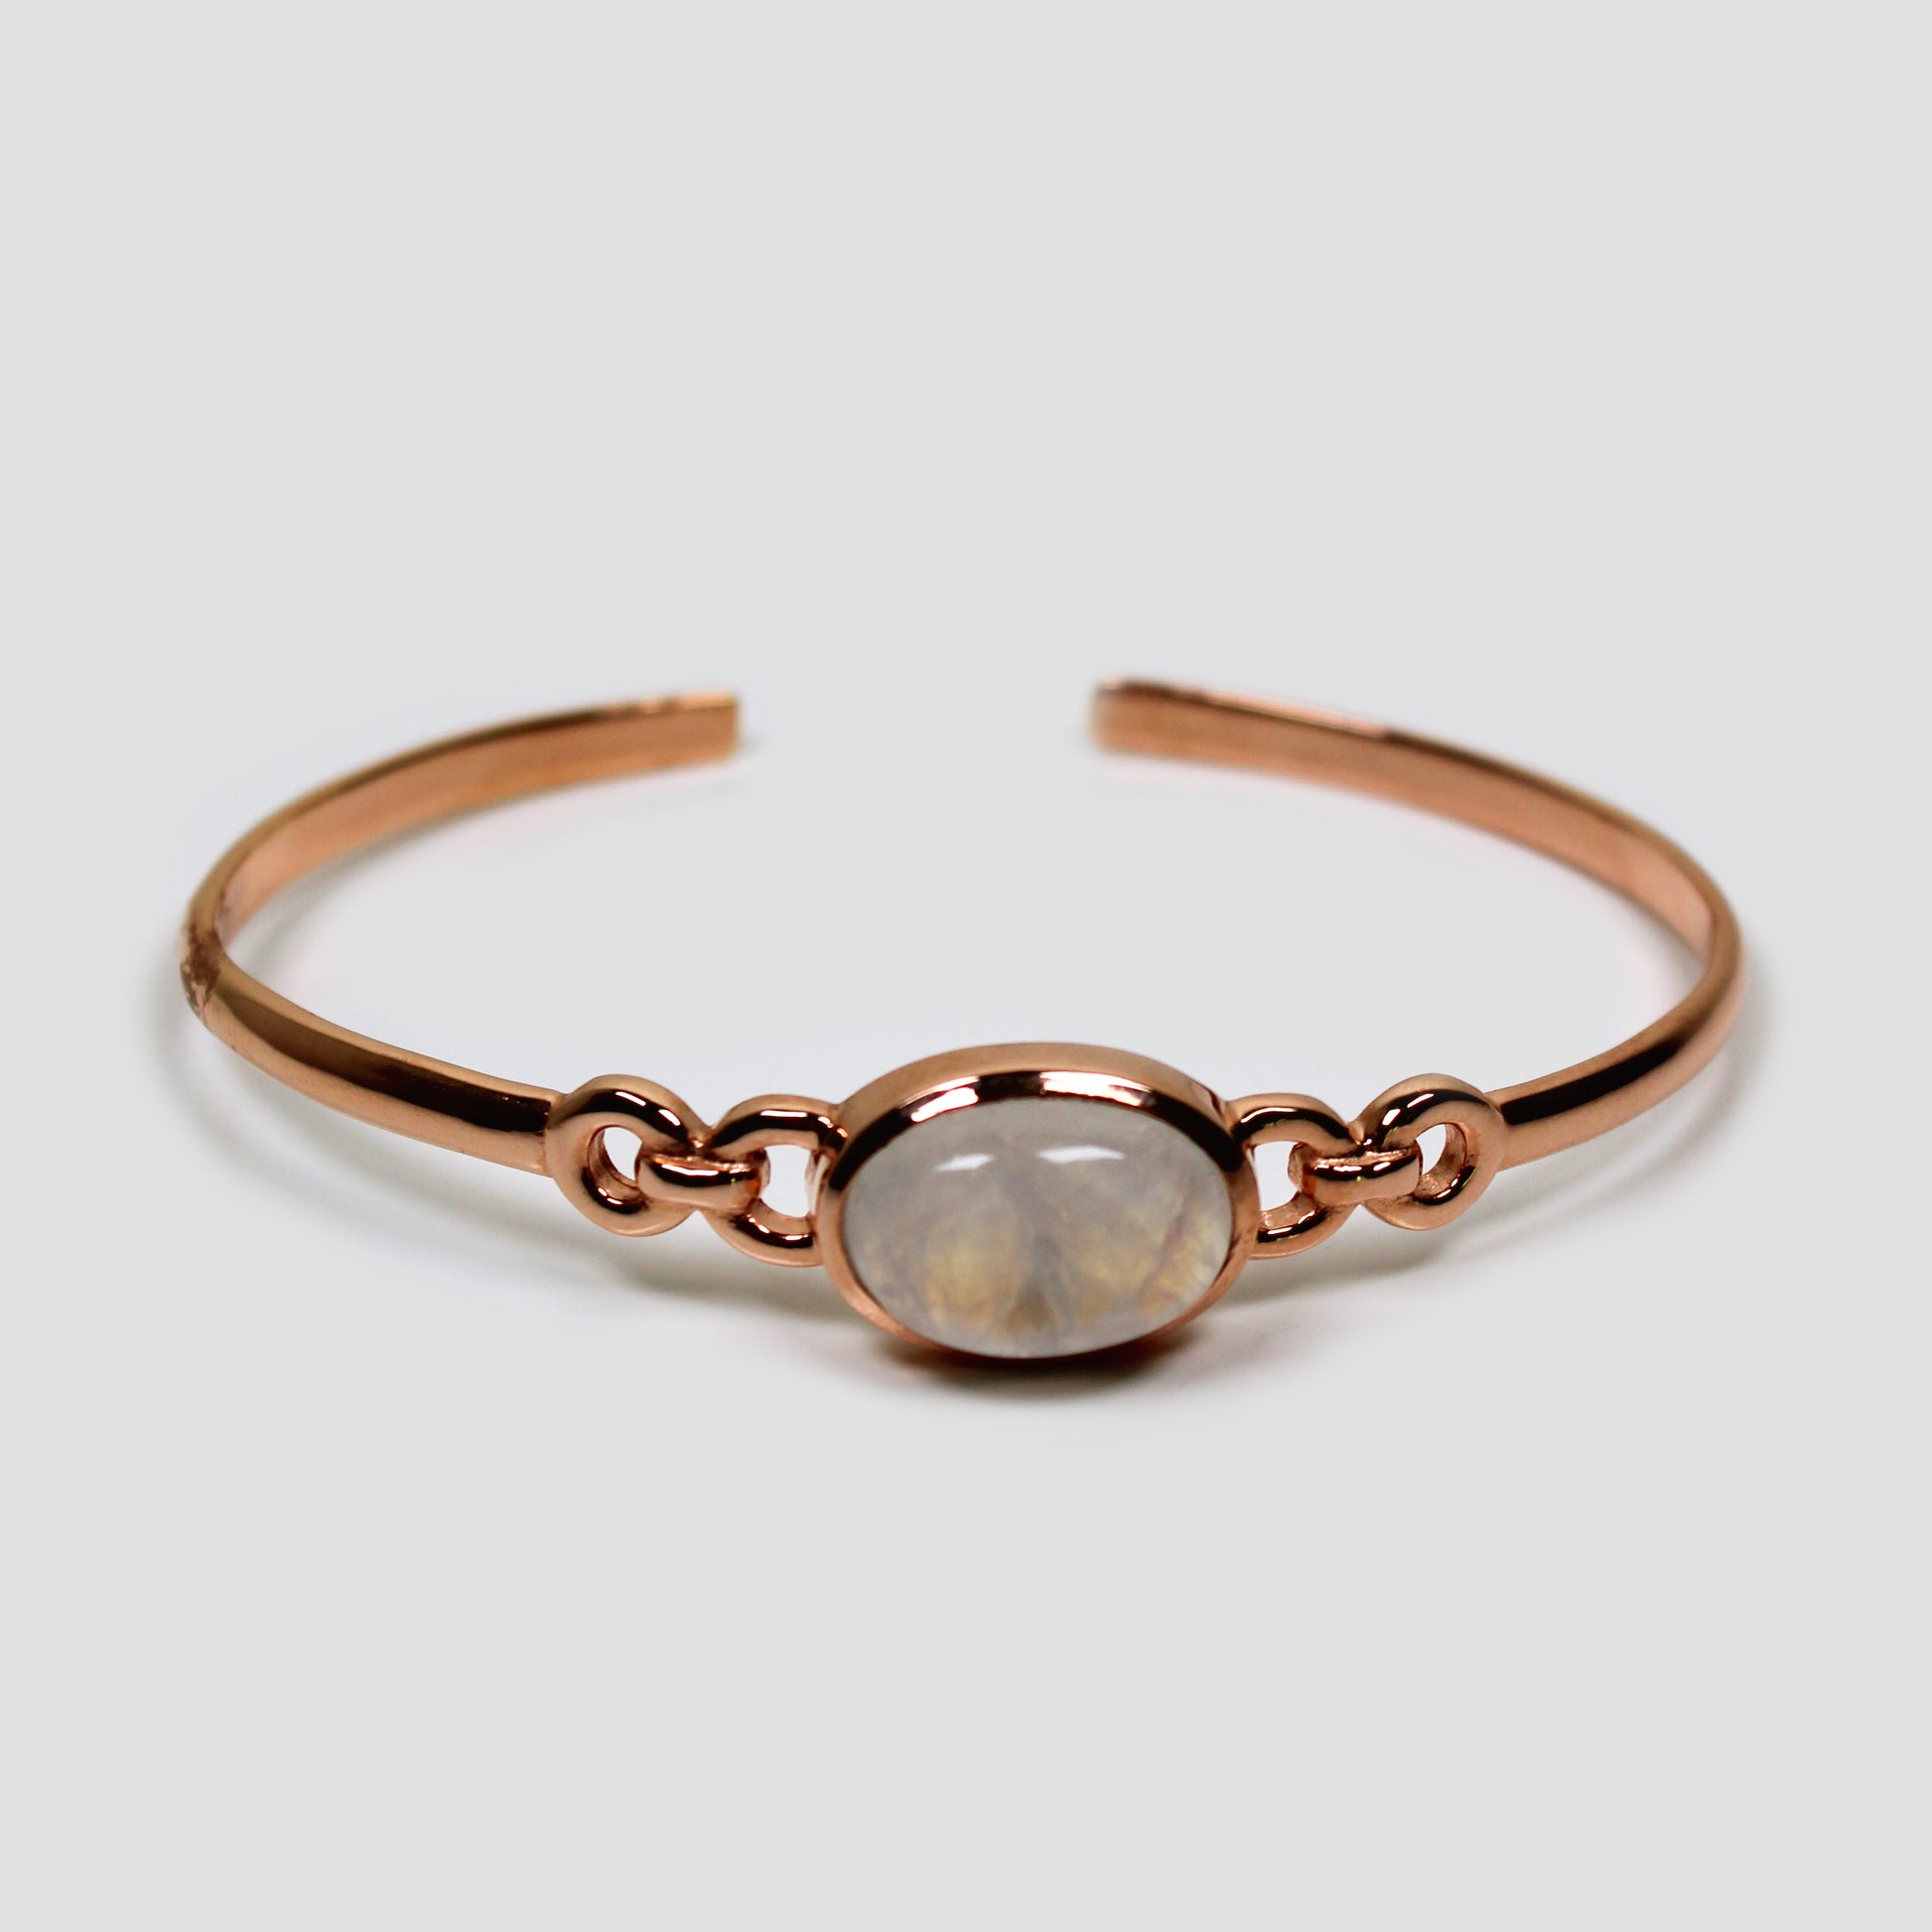 White Moonstone Adjustable Silver Rose Gold Bangle on a gray surface